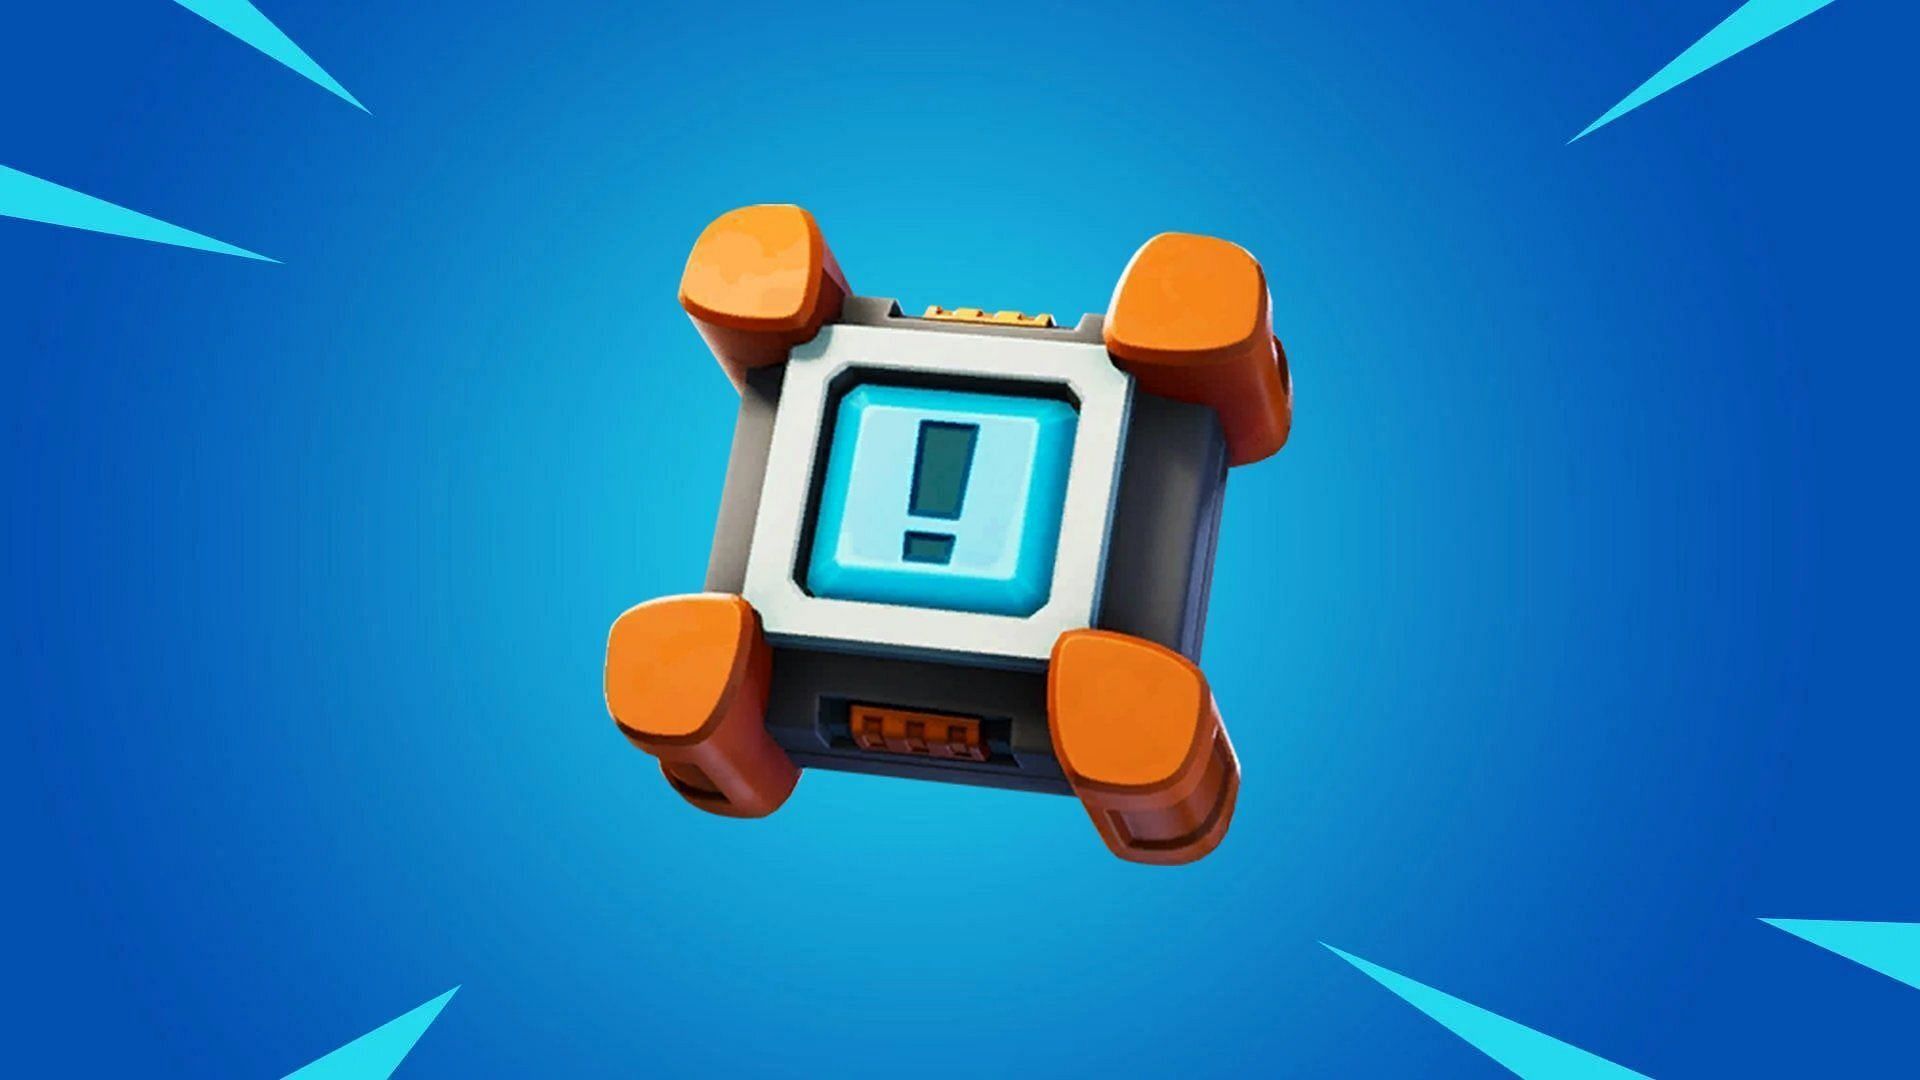 Where to find Crash Pad Jr. In Fortnite